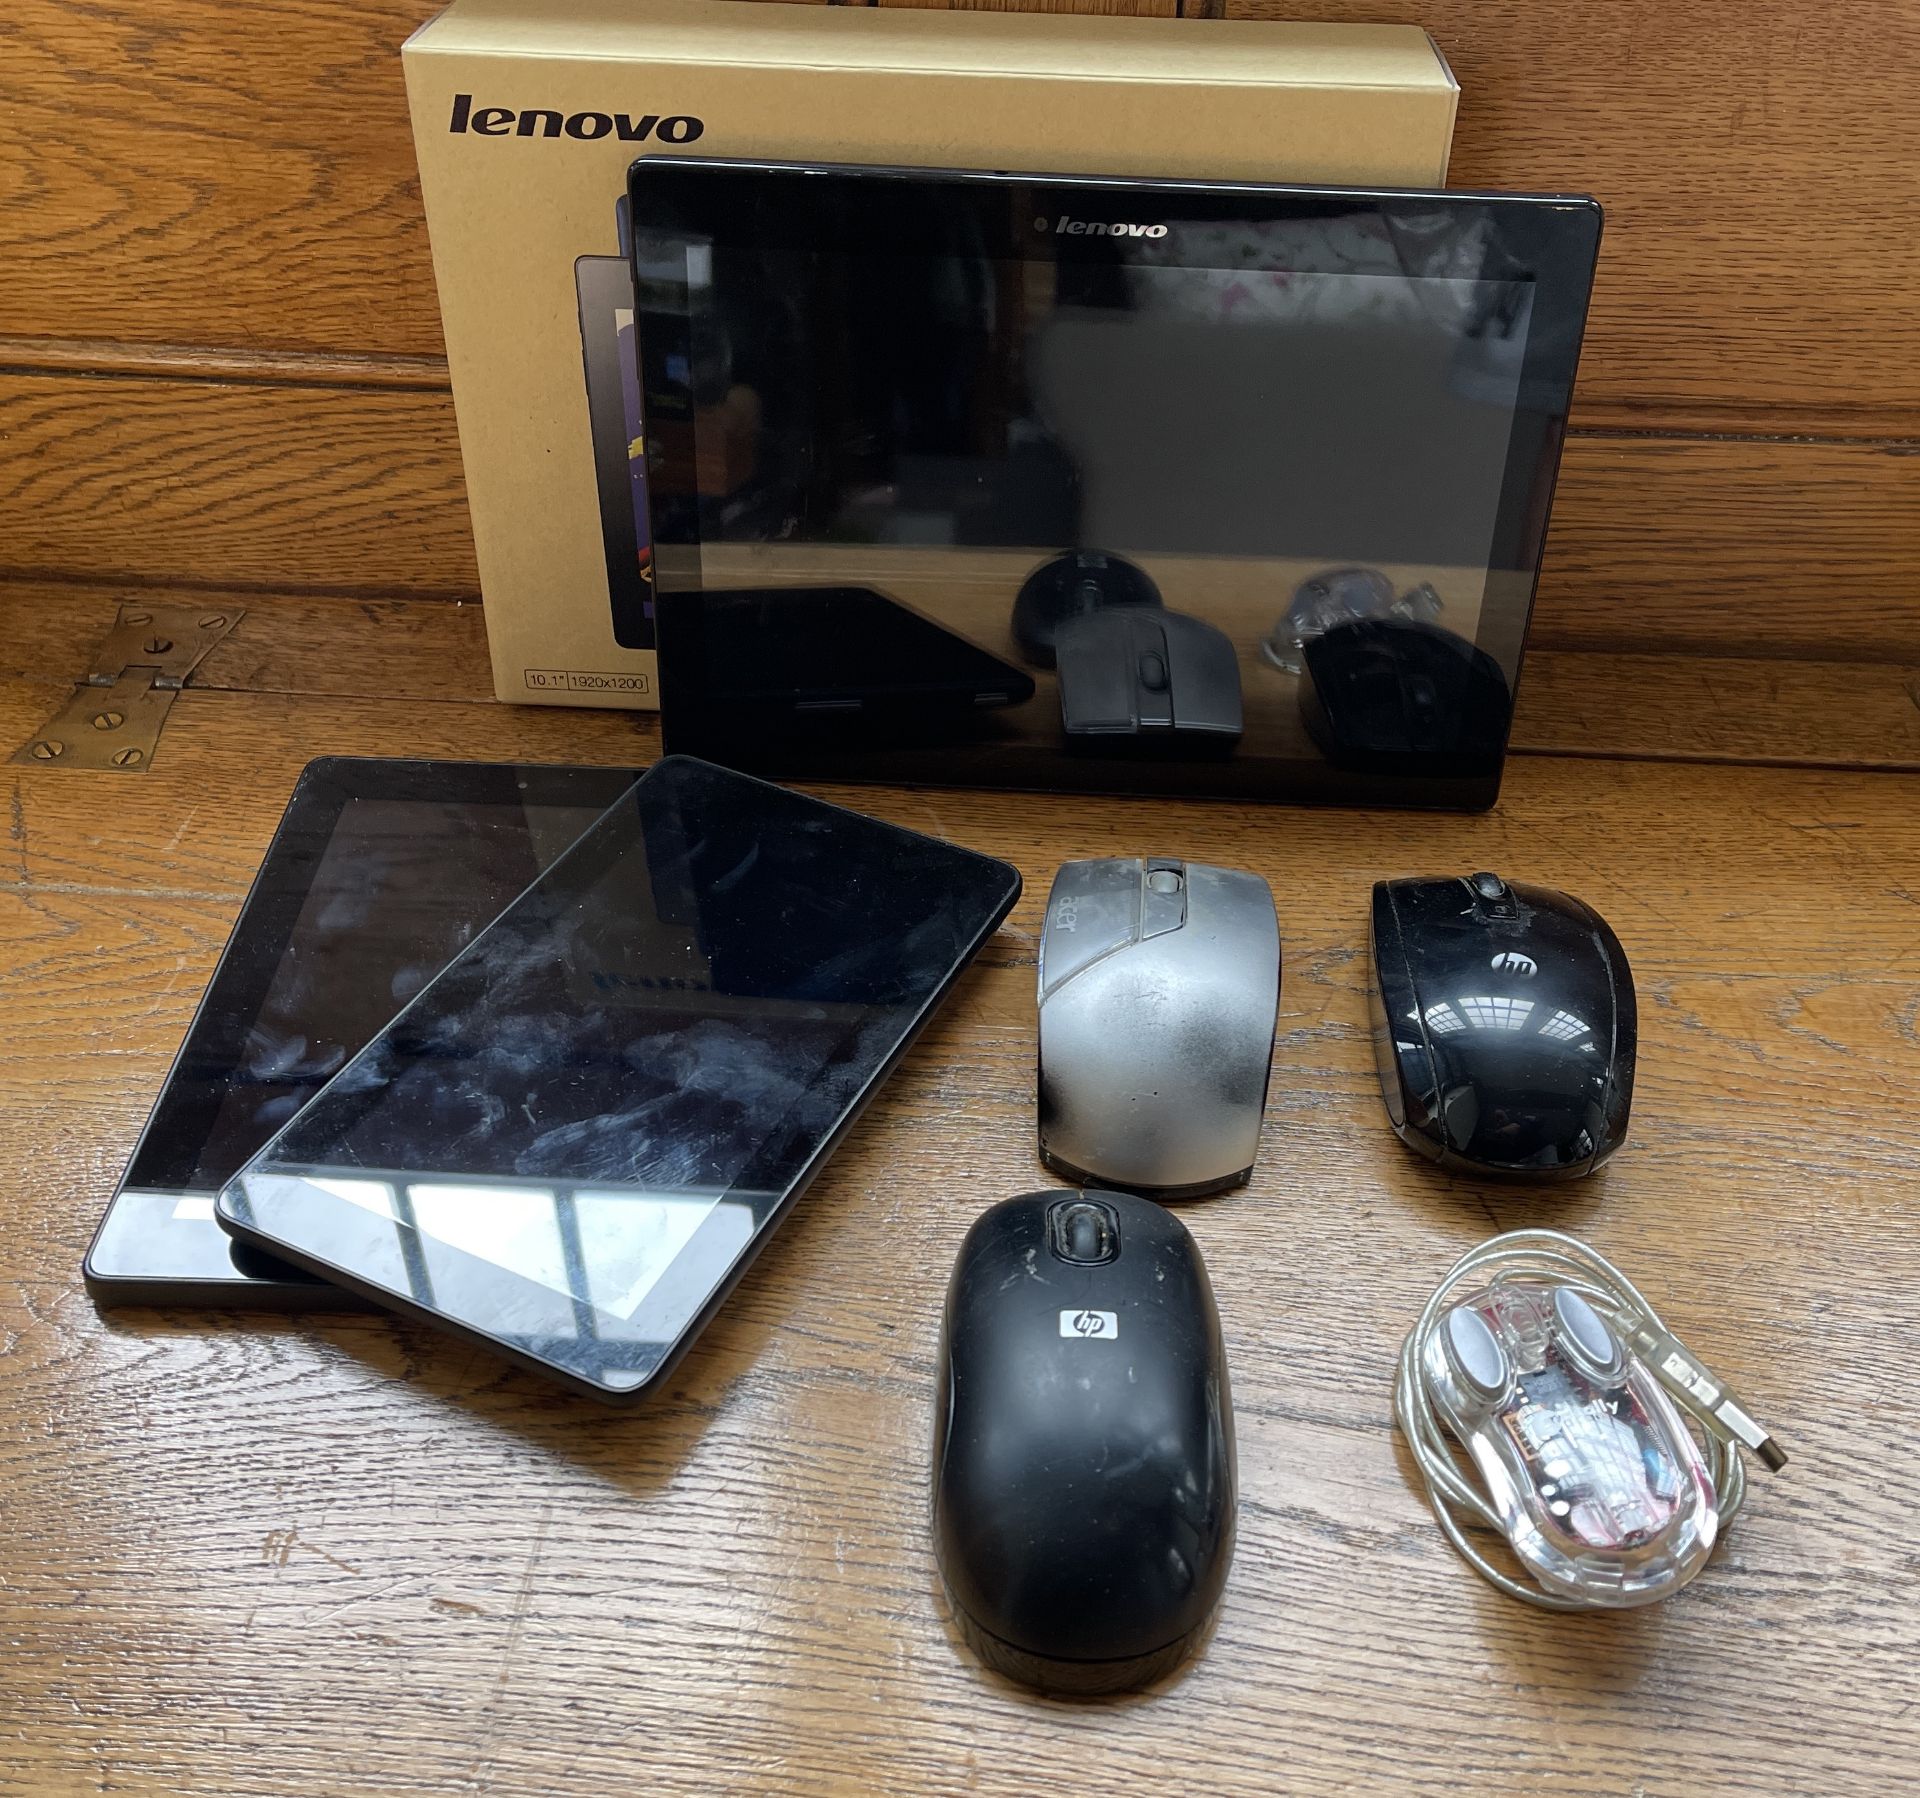 LENOVO TABLET AND TWO AMAZON TABLETS , LOT OF 4 MICE - Image 3 of 3